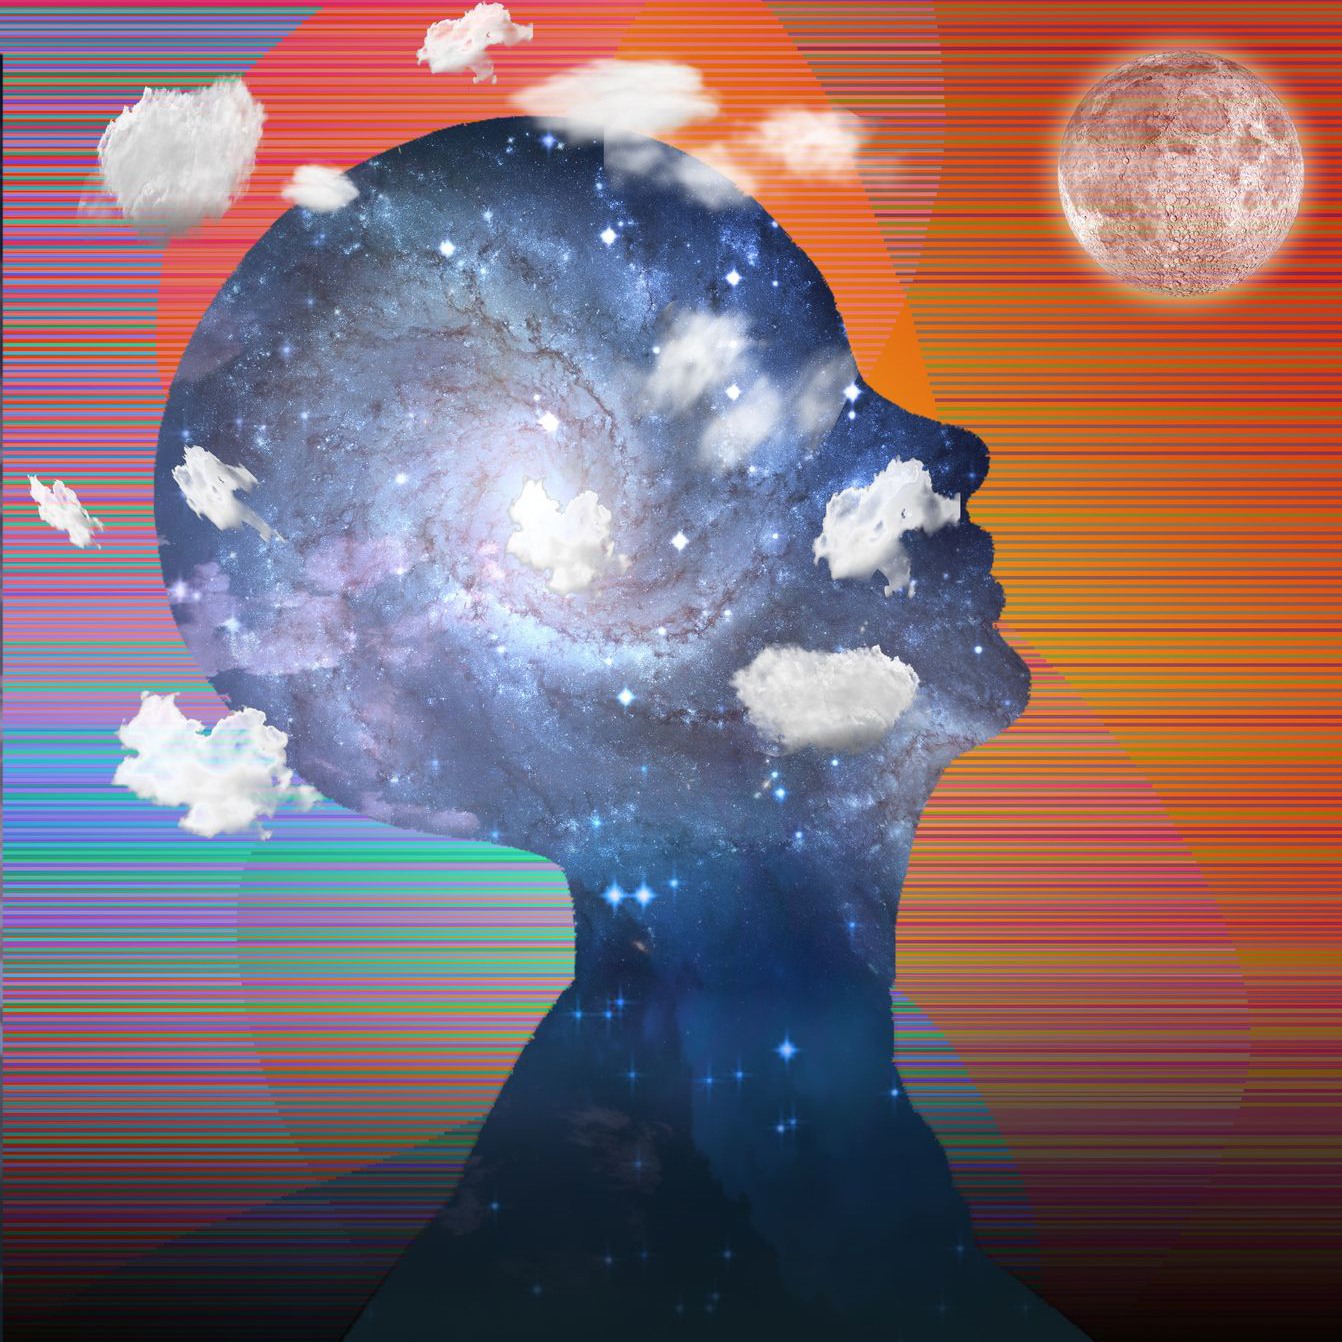 How to Imprint Into Our Subconscious ⋆ Mind Power